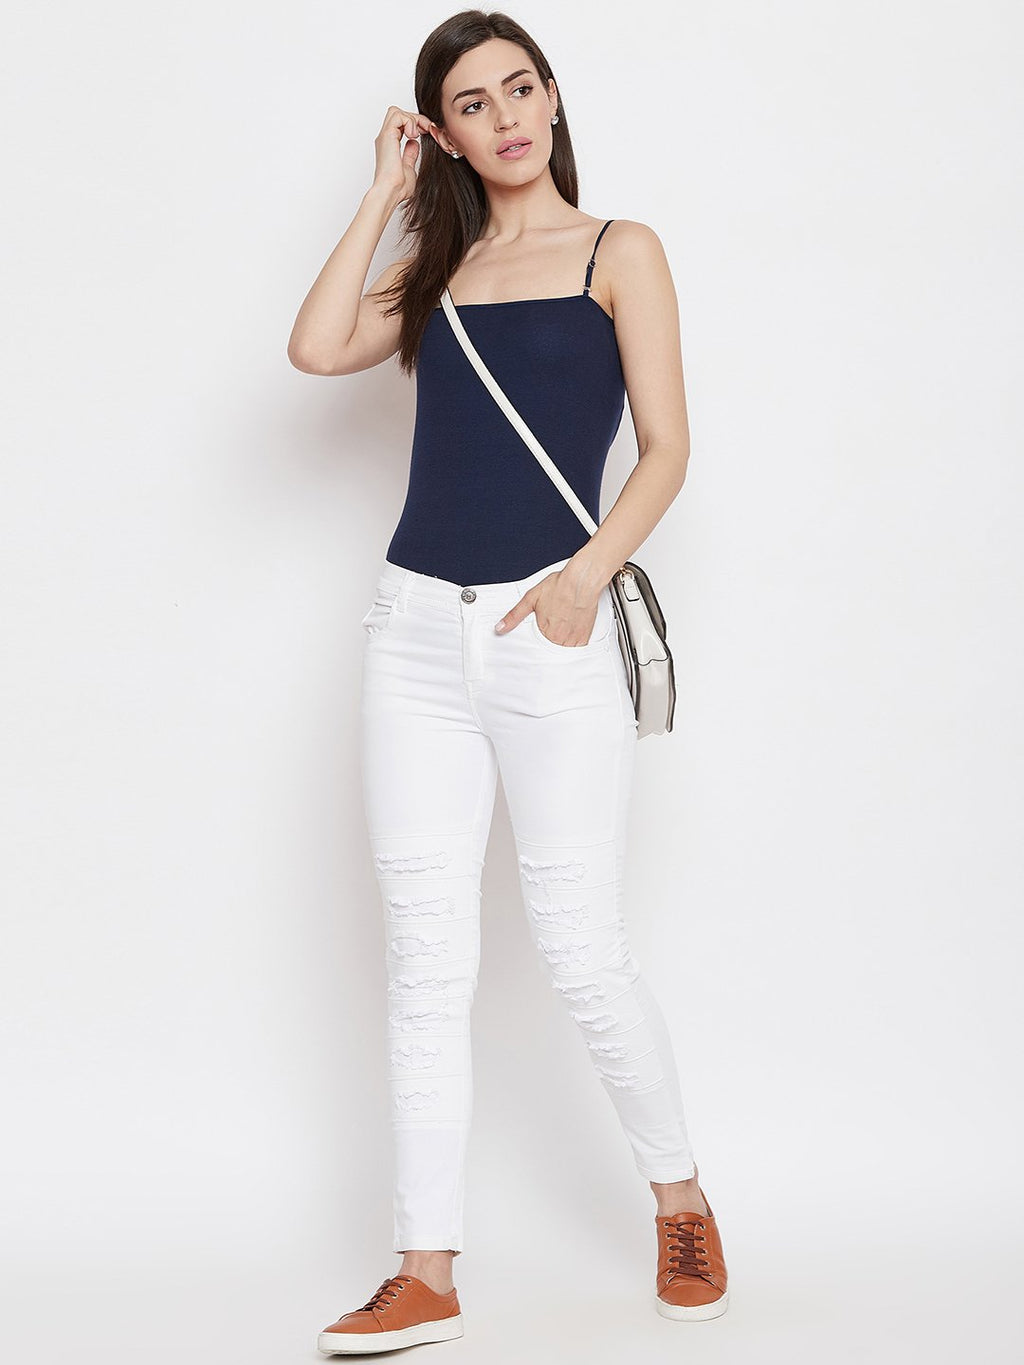 Distressed Stretchable White Jeans - NiftyJeans